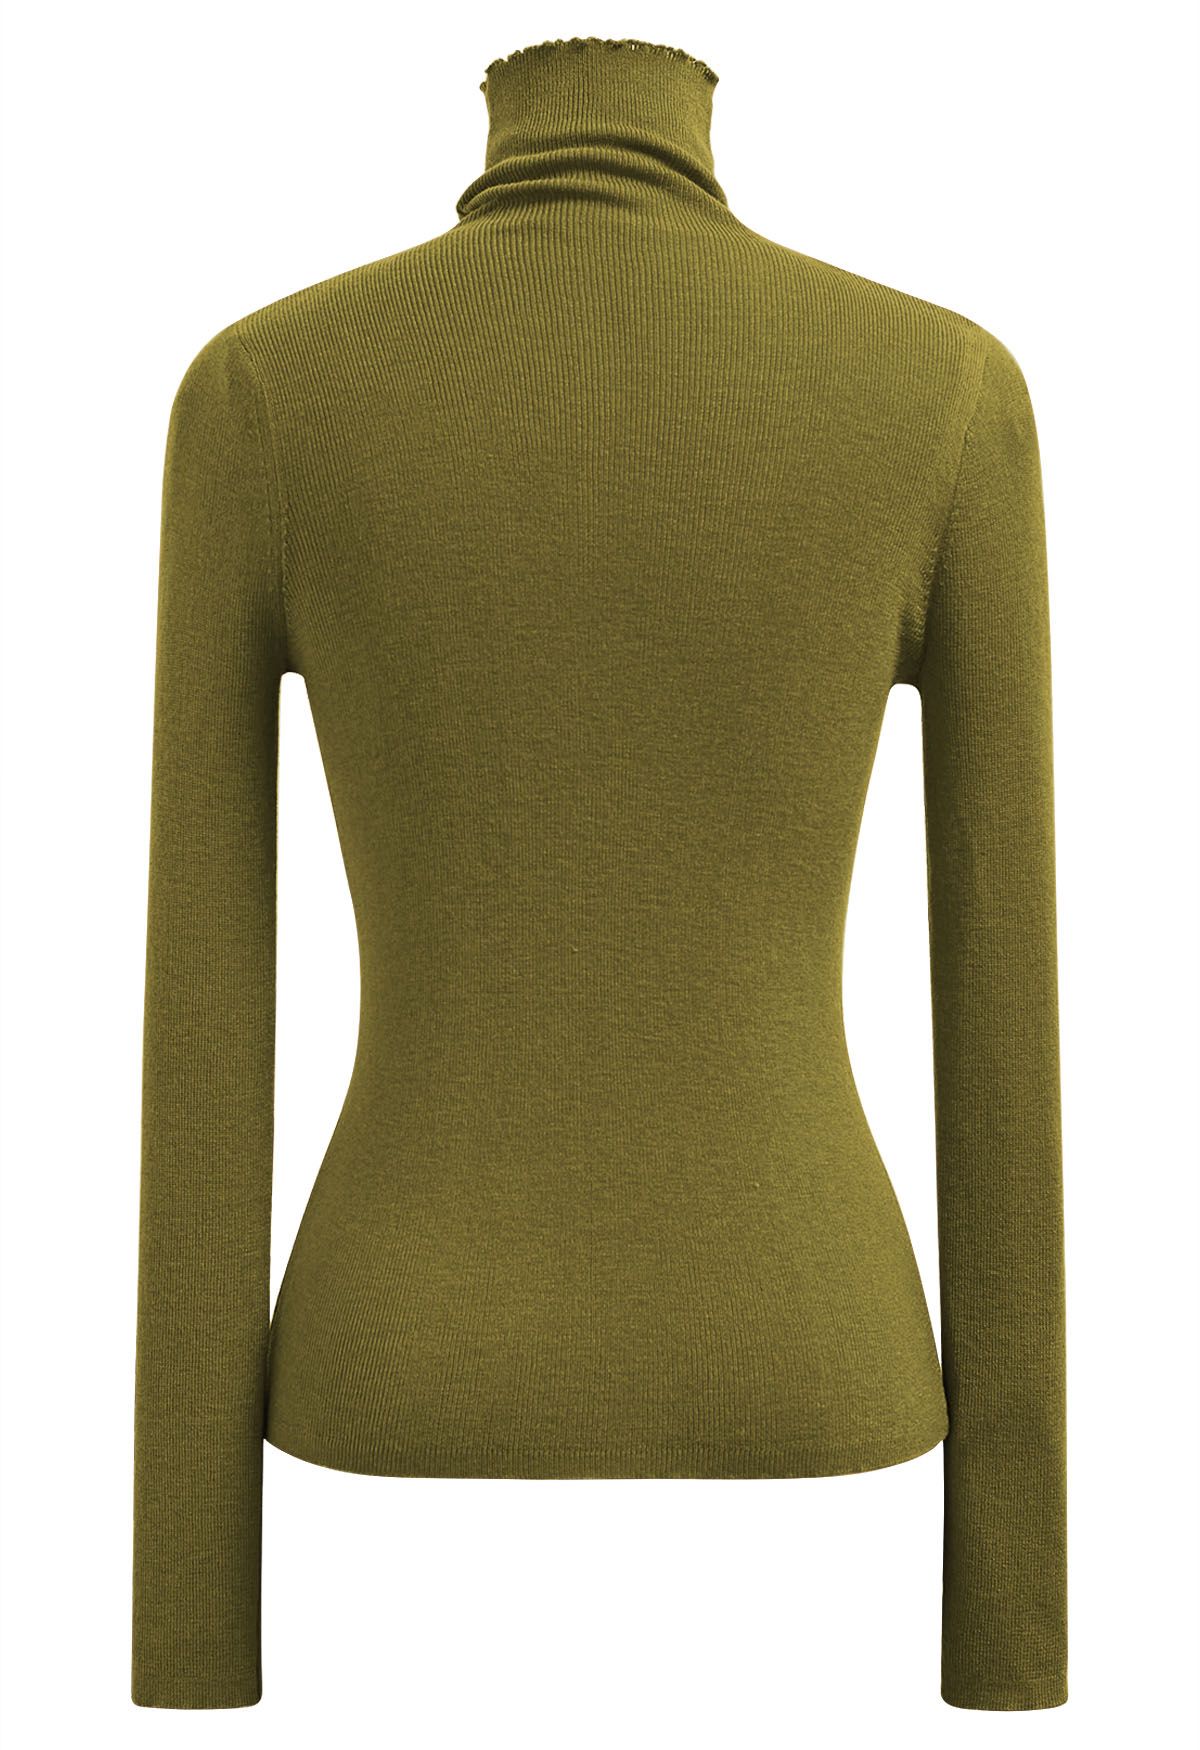 Basic High Neck Soft Knit Top in Olive